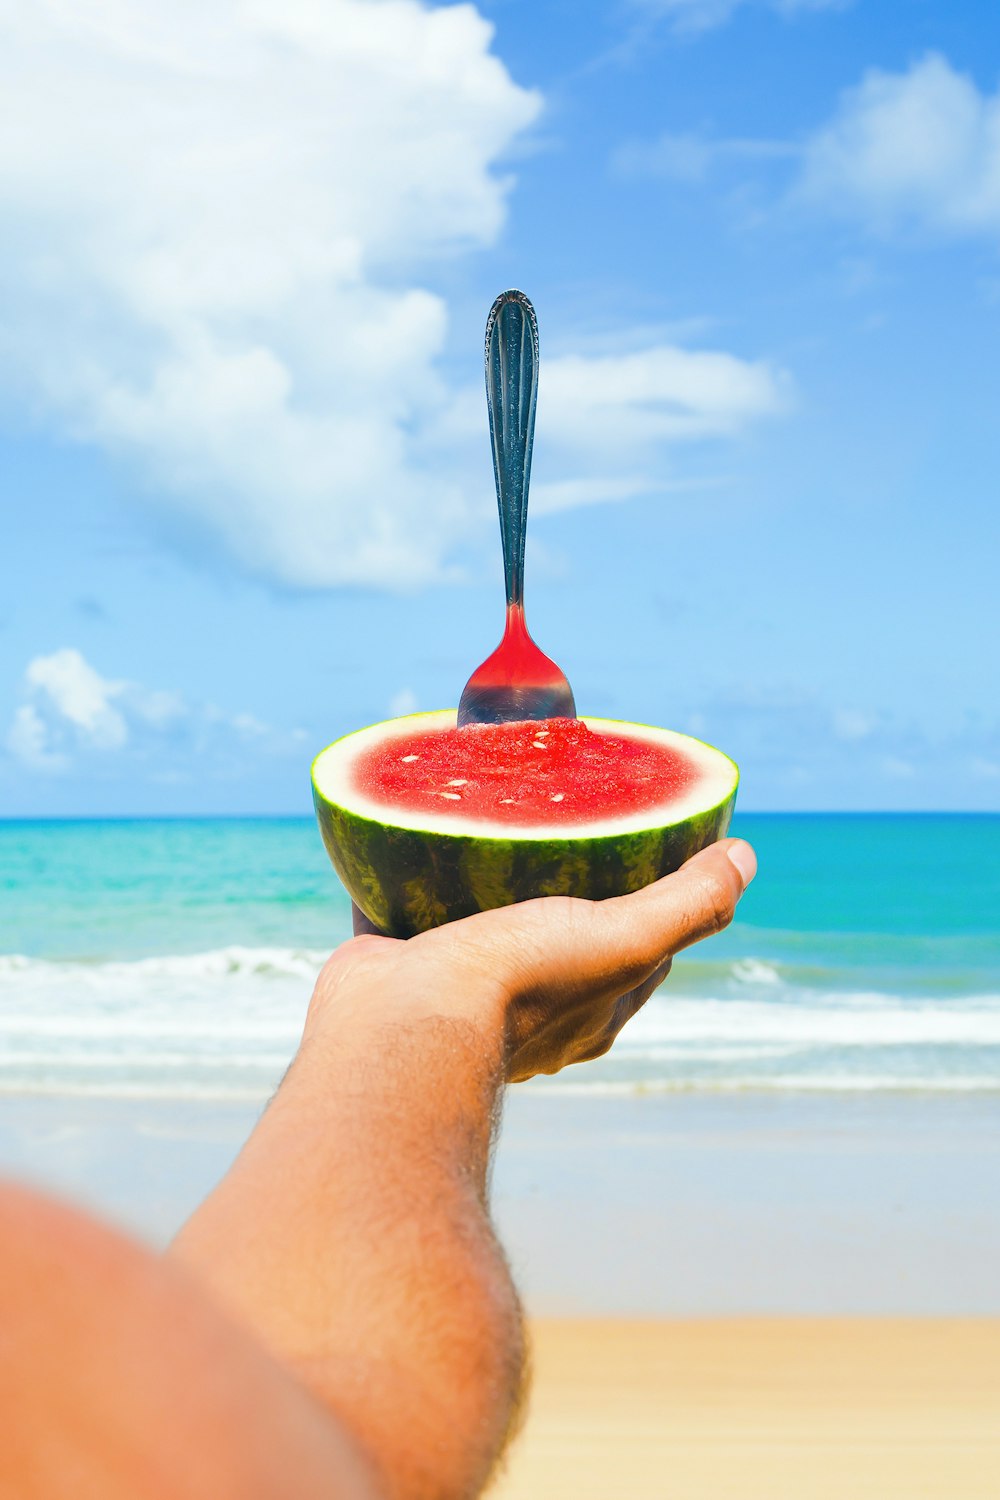 a hand holding a slice of watermelon on the beach